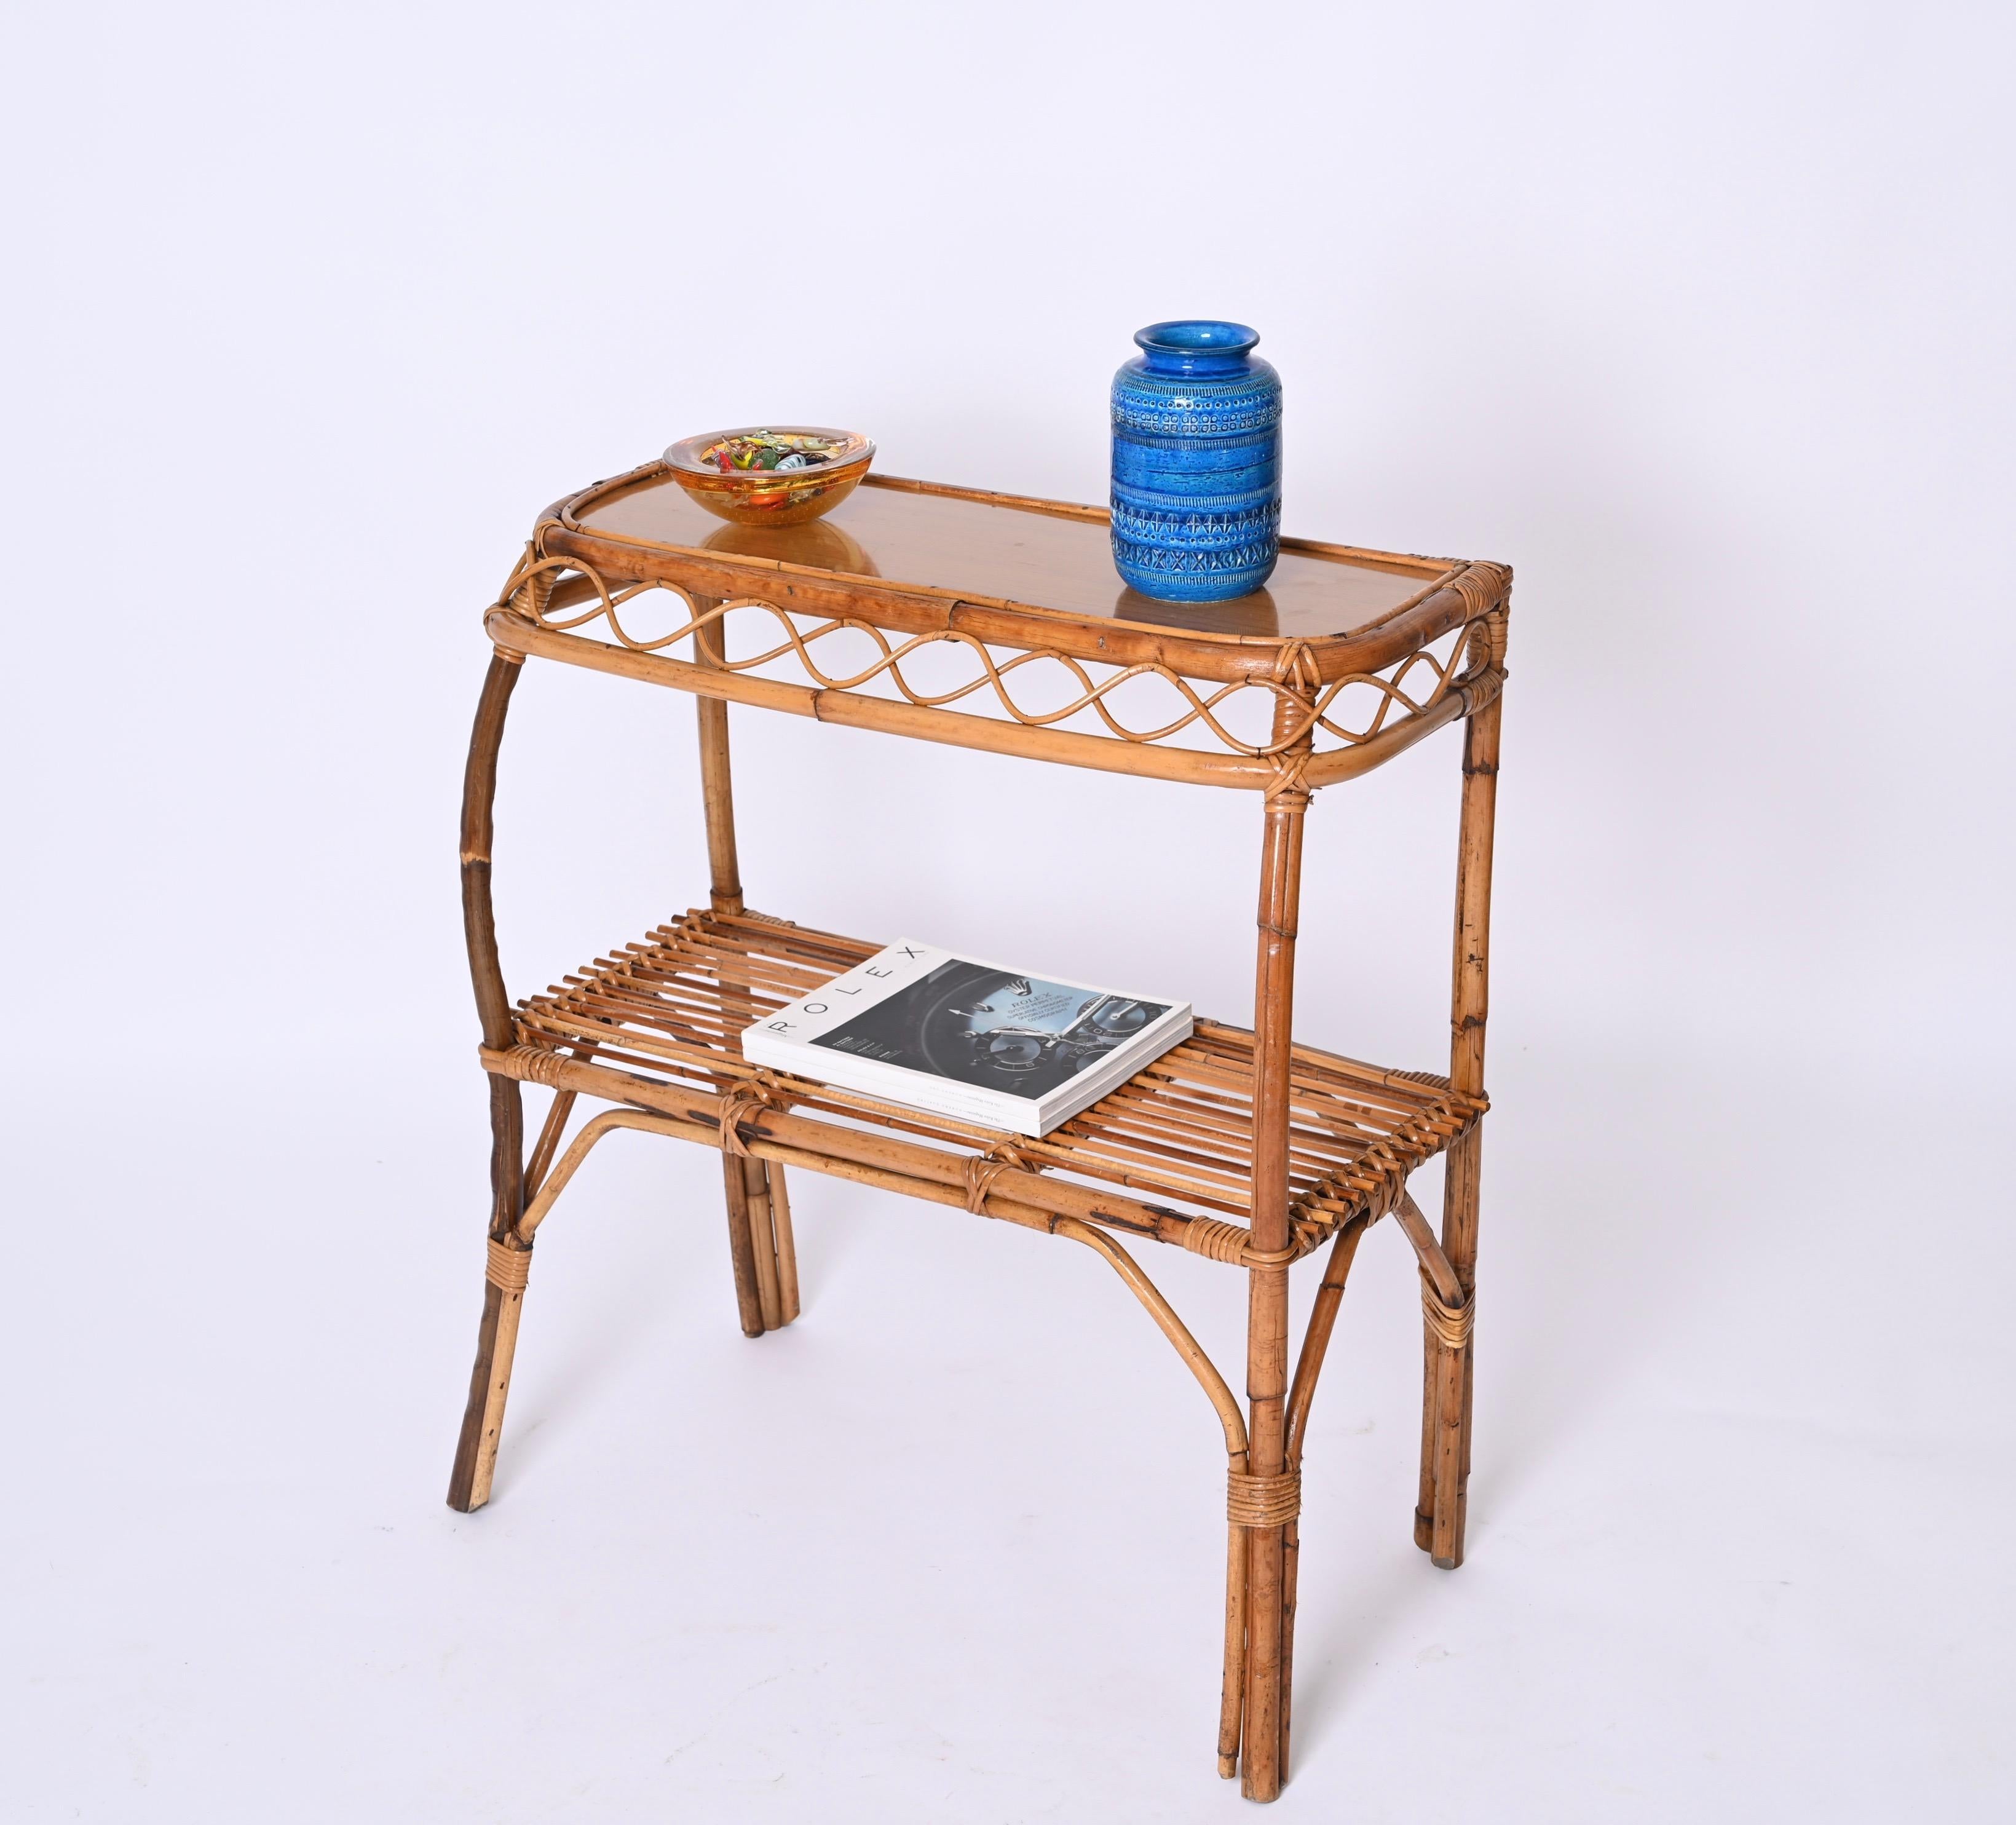 Stunning console table in bamboo and rattan. This amazing piece was produced in the style of Franco Albini in Italy during the 1960s.

Fully handmade, perfect example of Italian manufacture from the 60s. The console has four beautiful curved legs